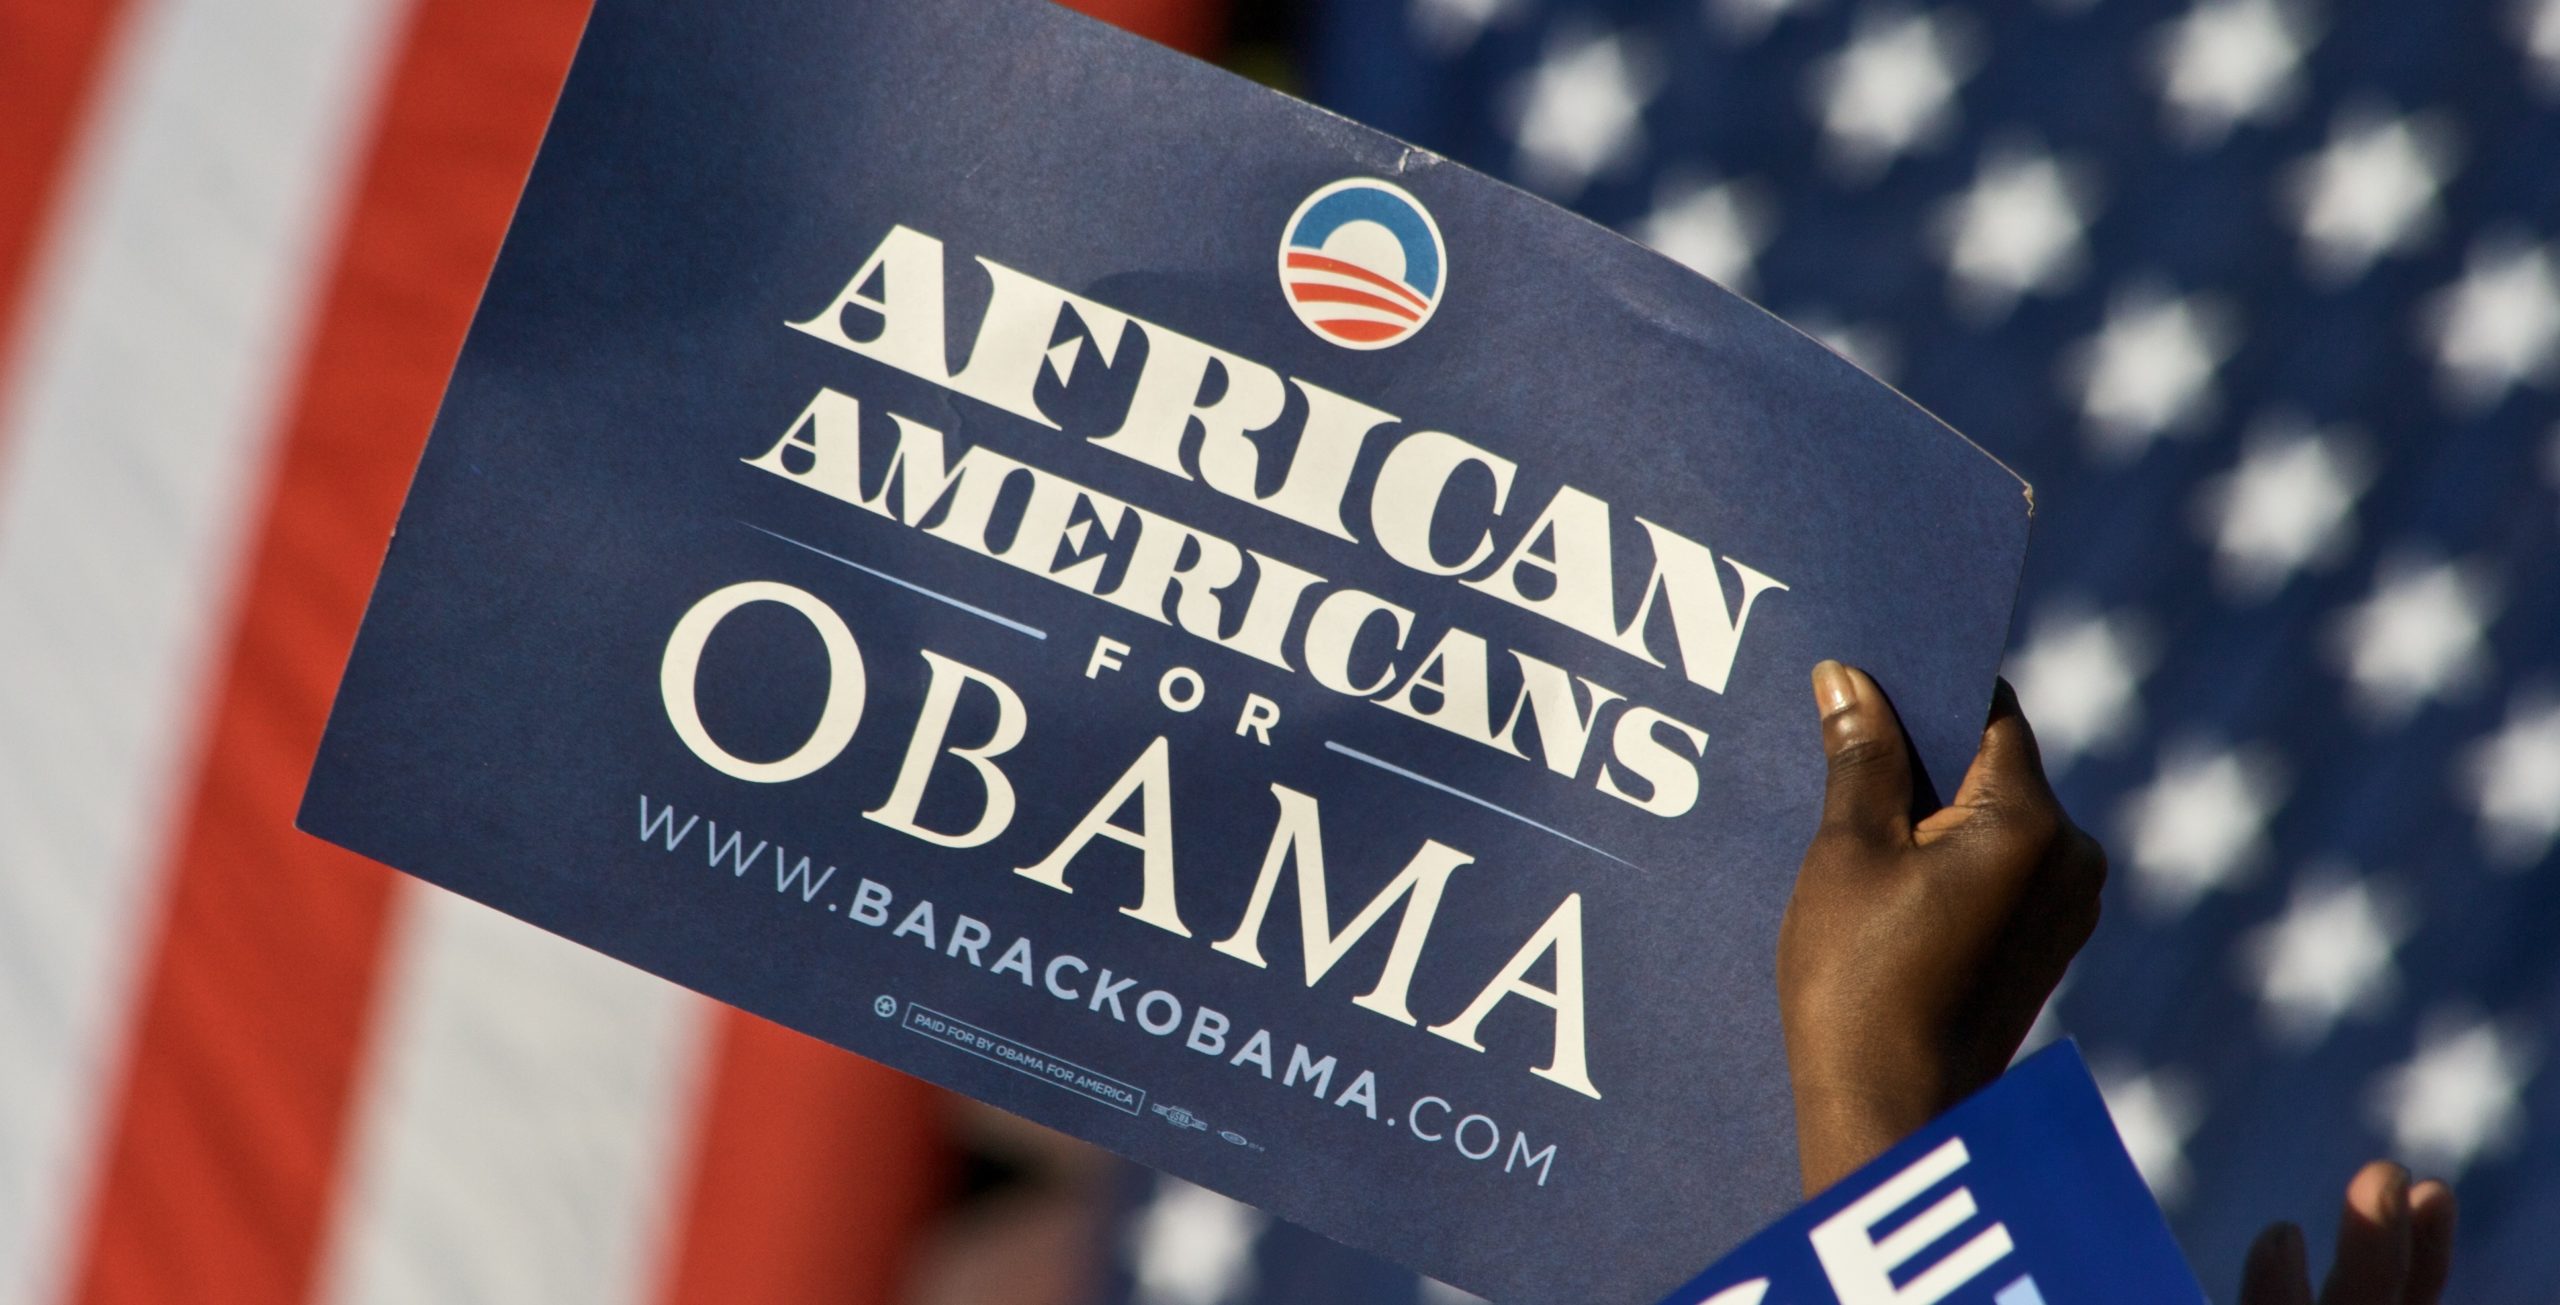 African Americans Obama